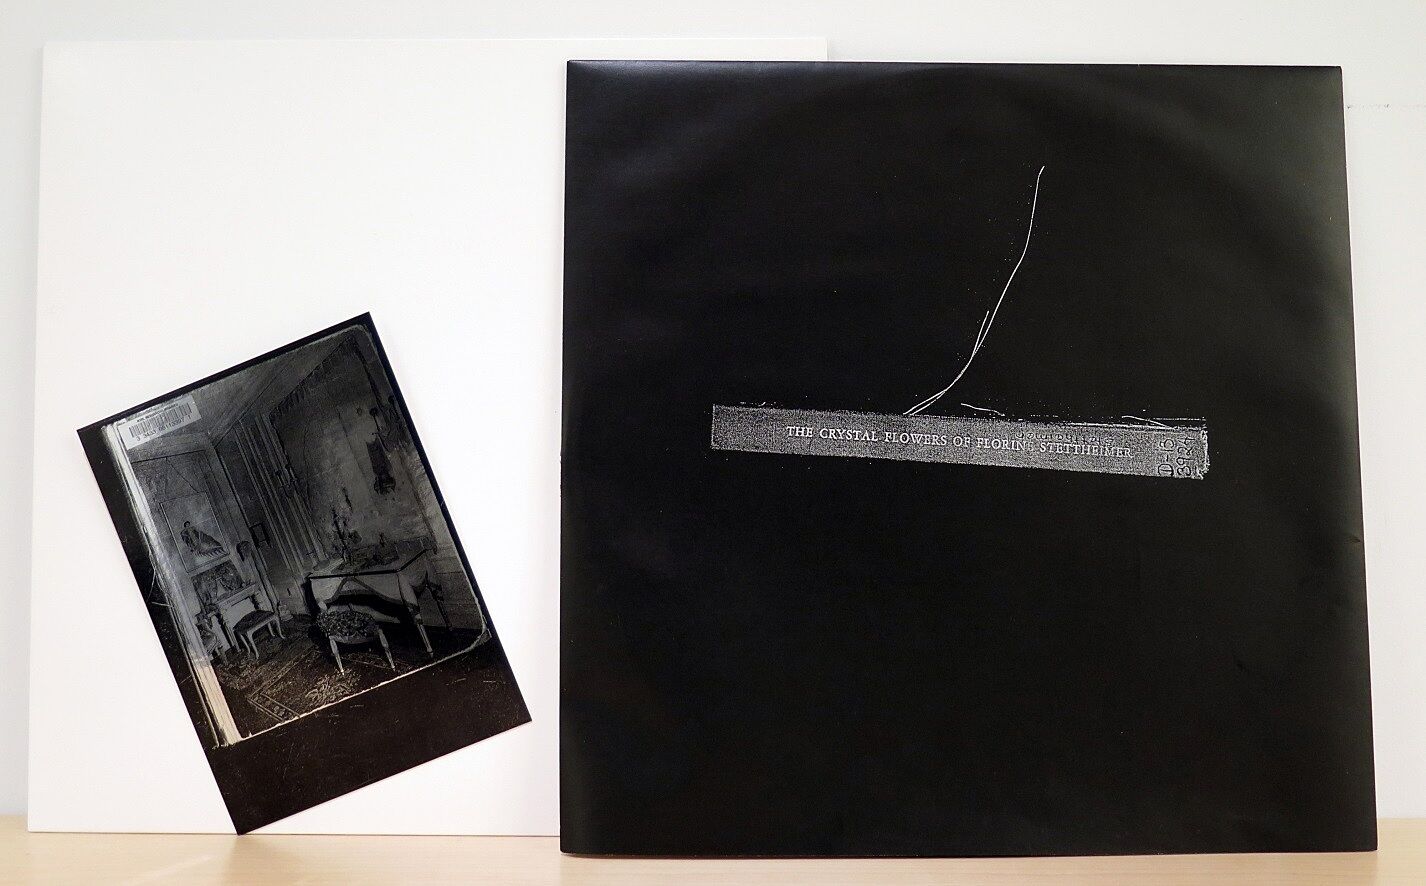 A black vinyl record jacket is shown with its insert to the left of it.